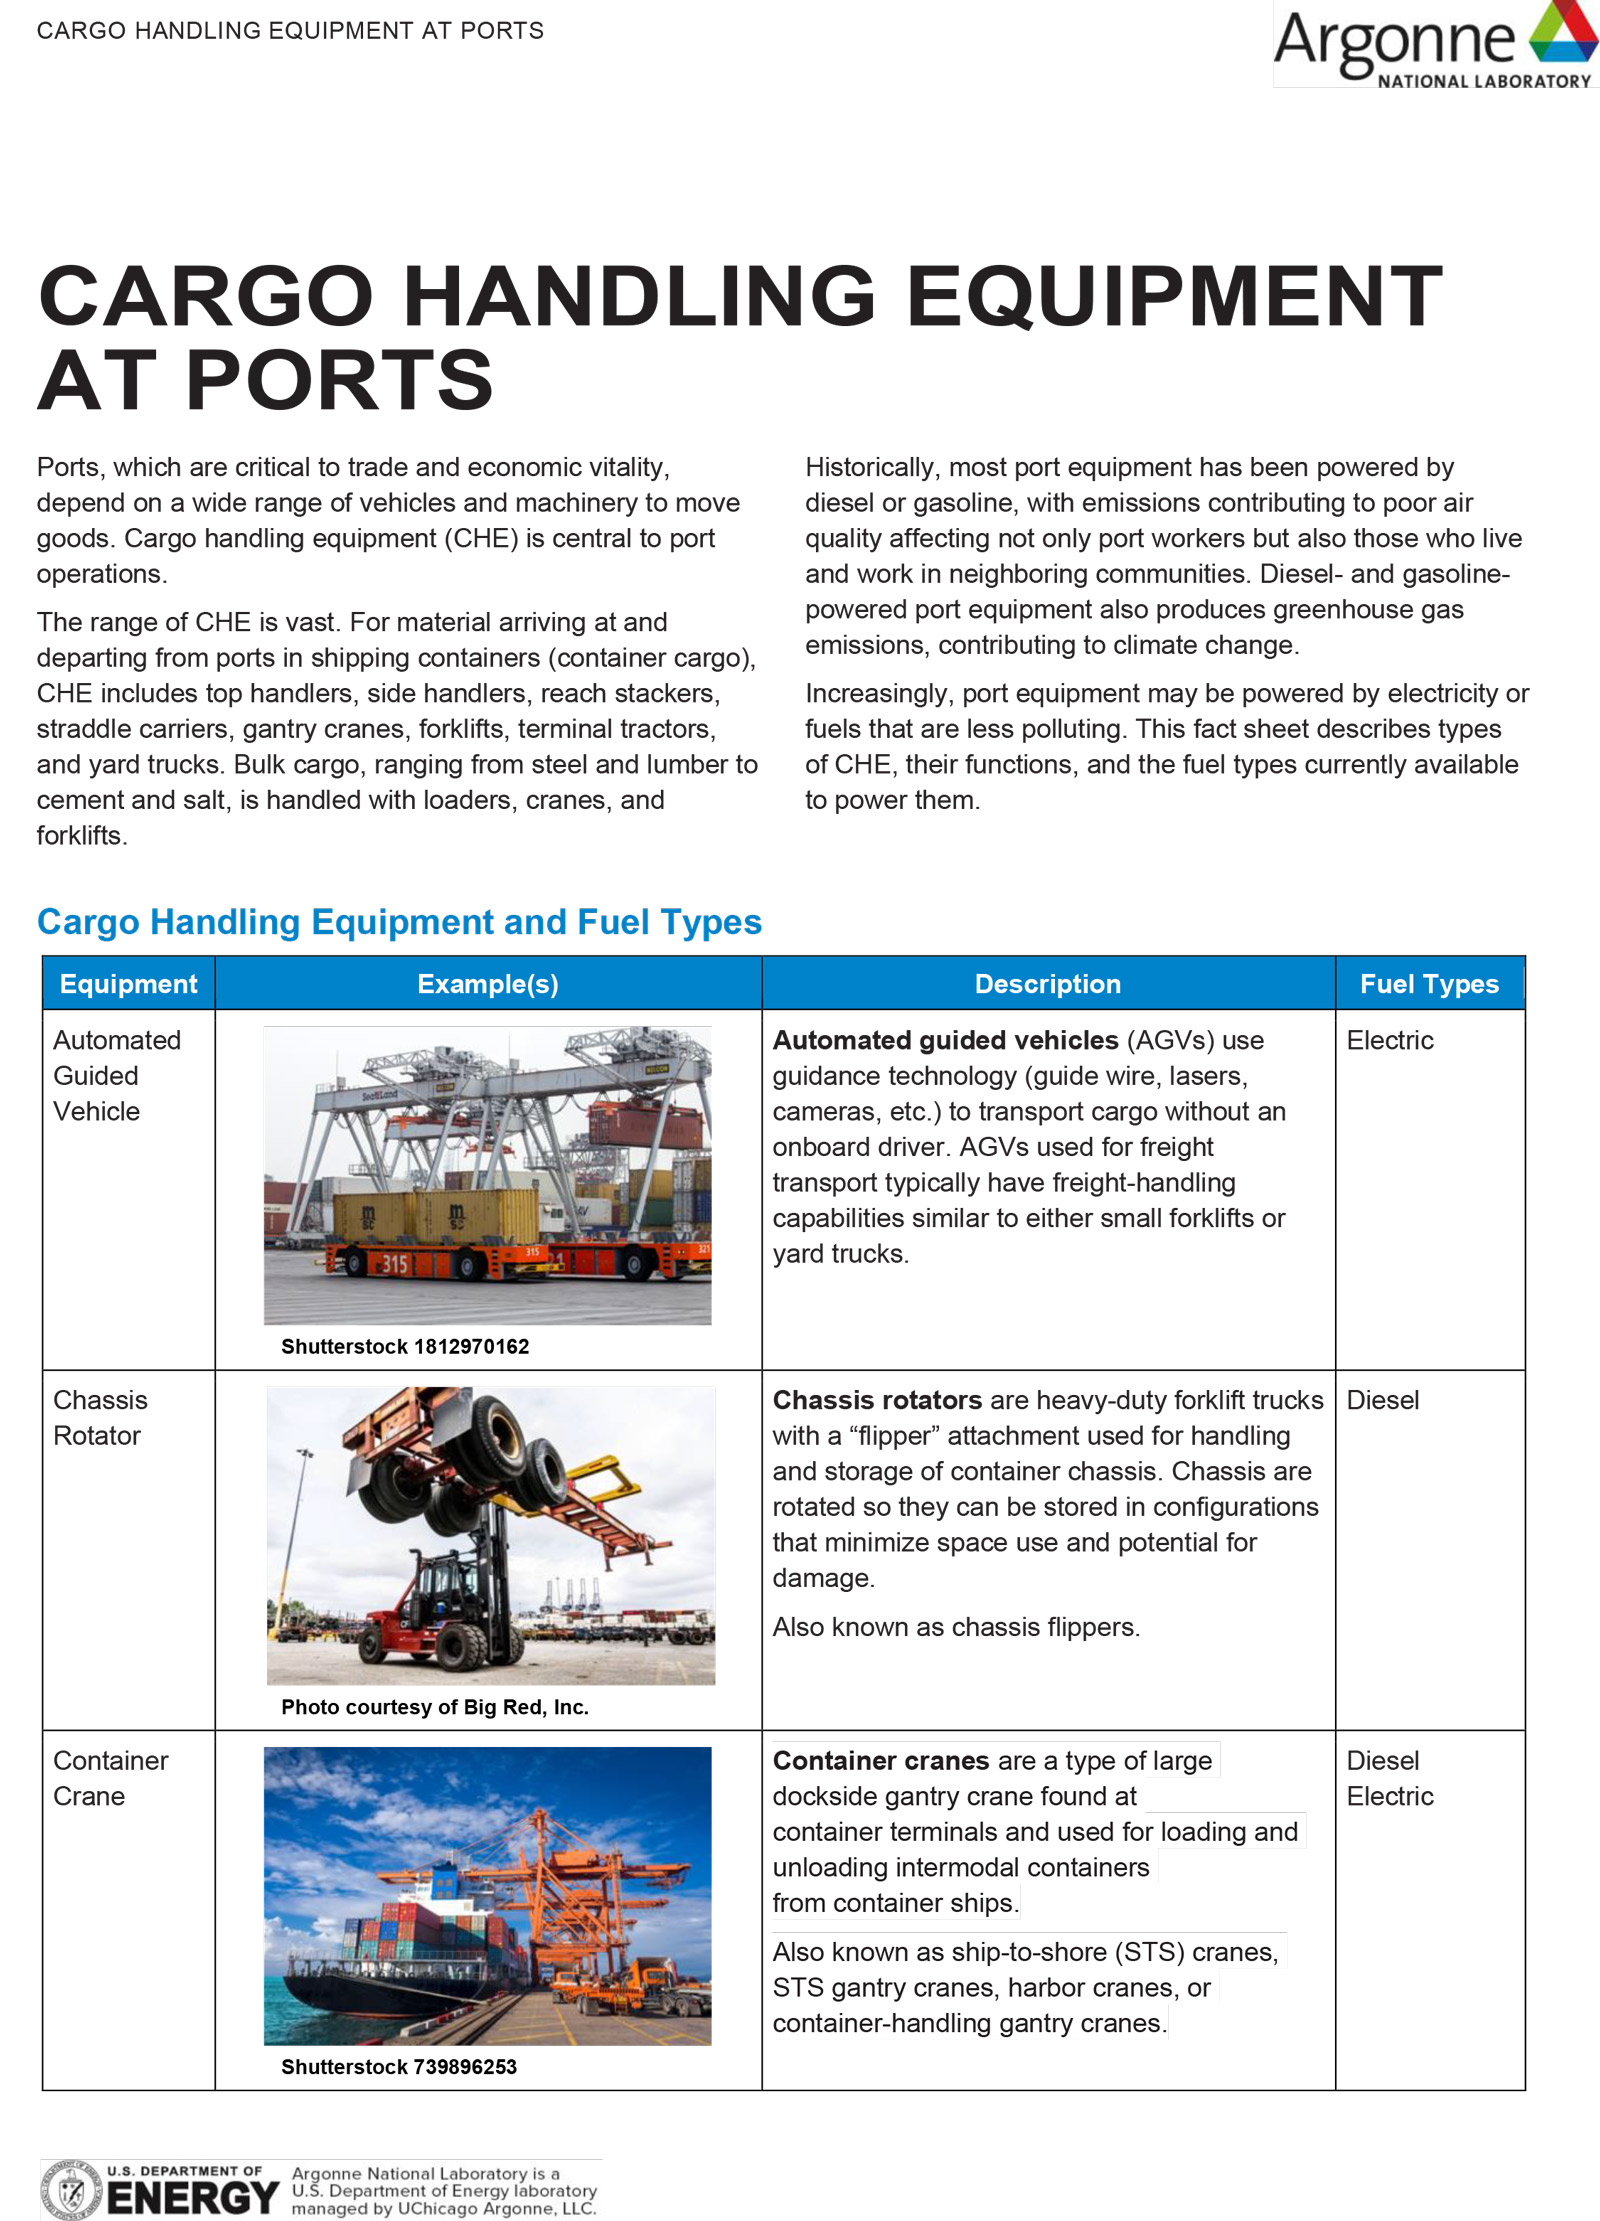 Image of the first page of the Cargo Handling Equipment At Ports factsheet